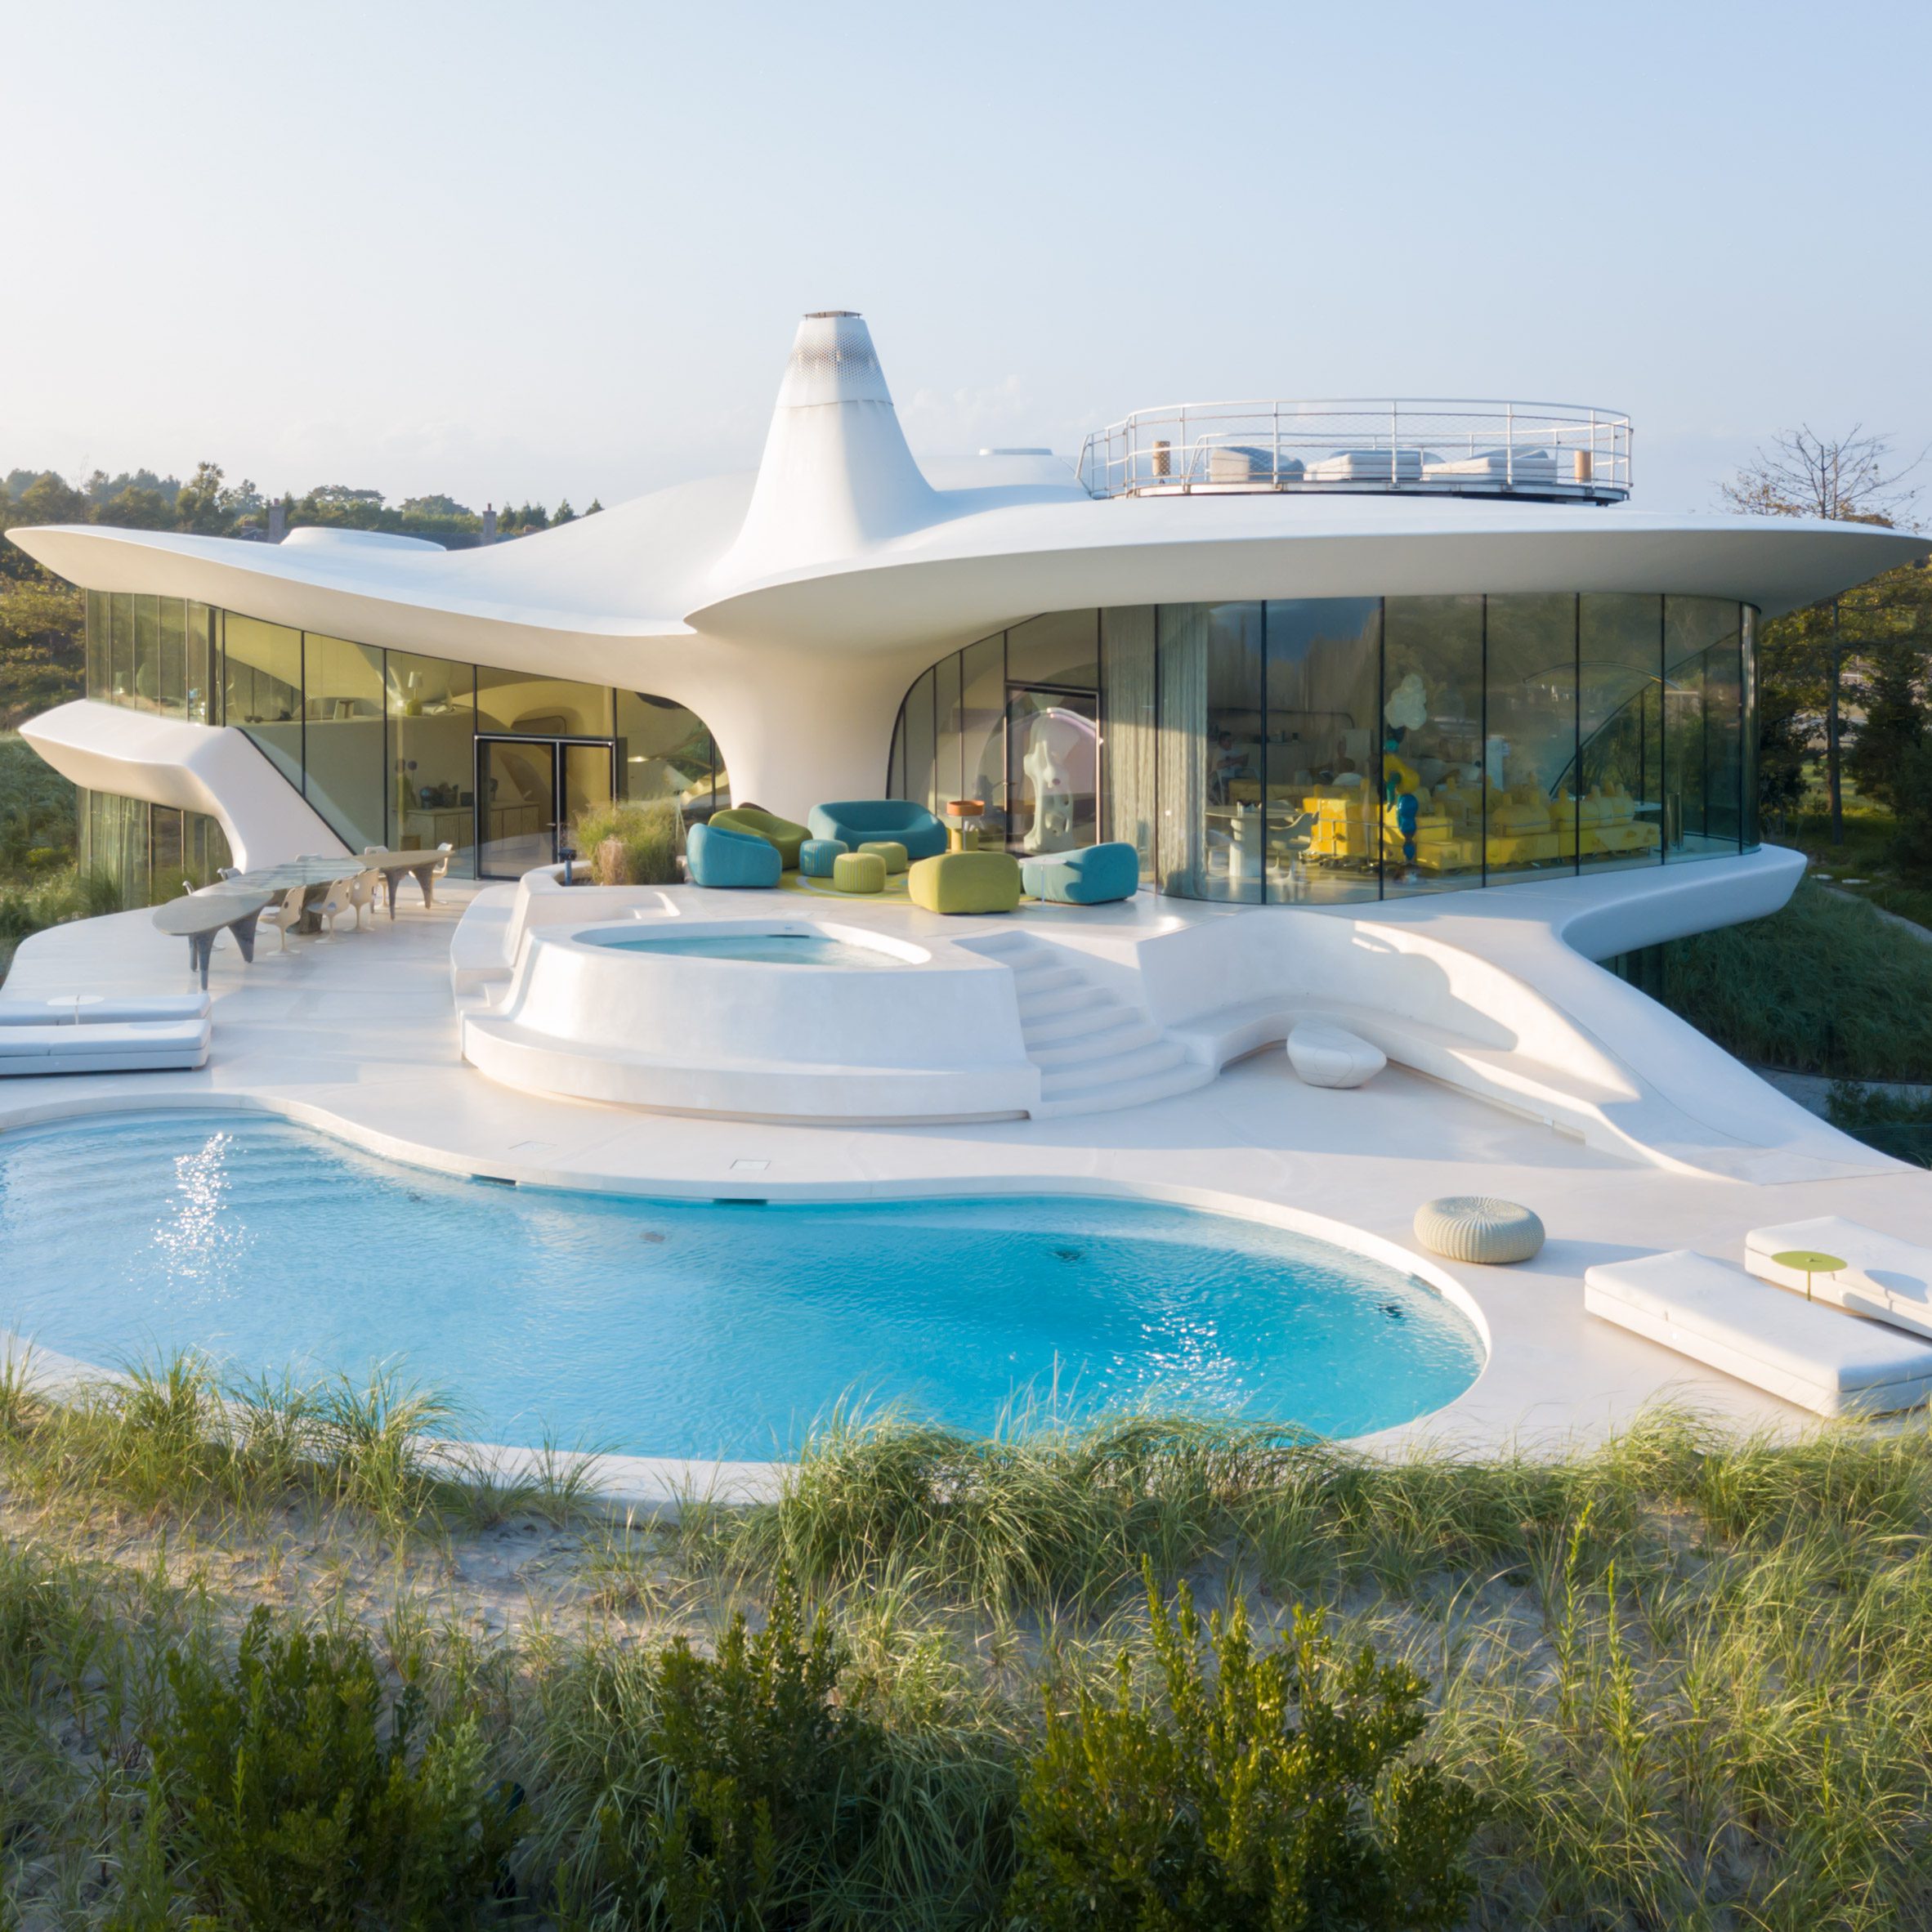 Whit modernist house with swimming pools in sand dune